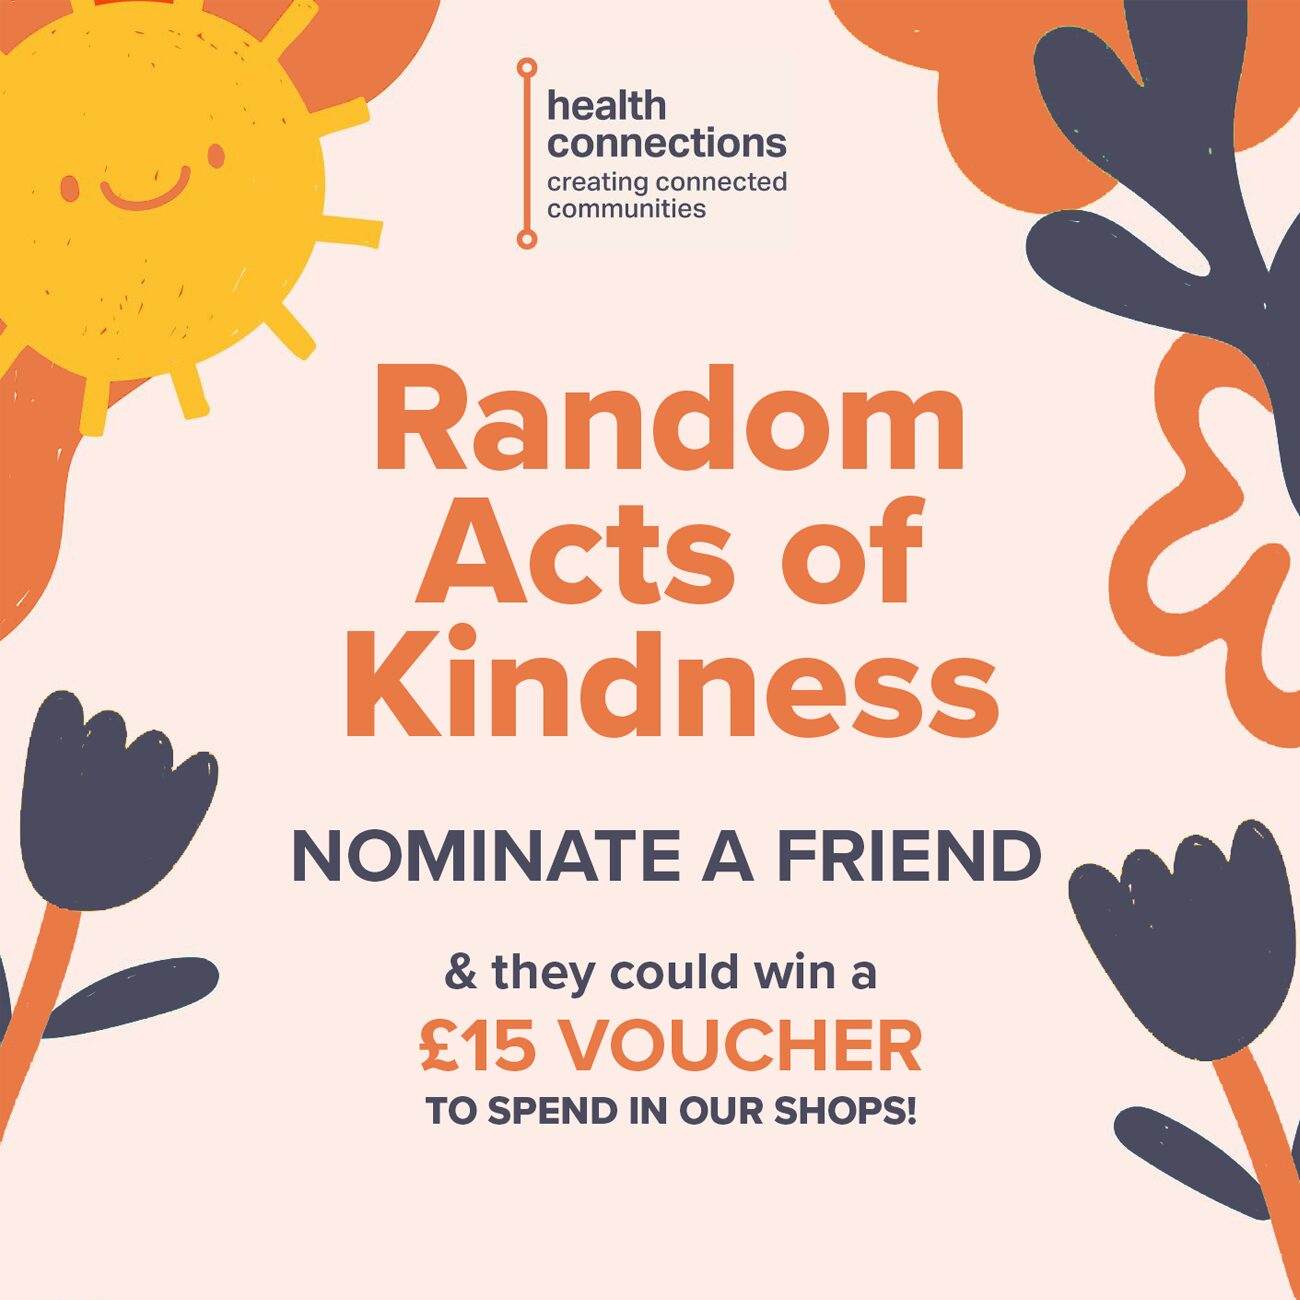 Random Acts of Kindness Initiative Launched in Market Square Shop